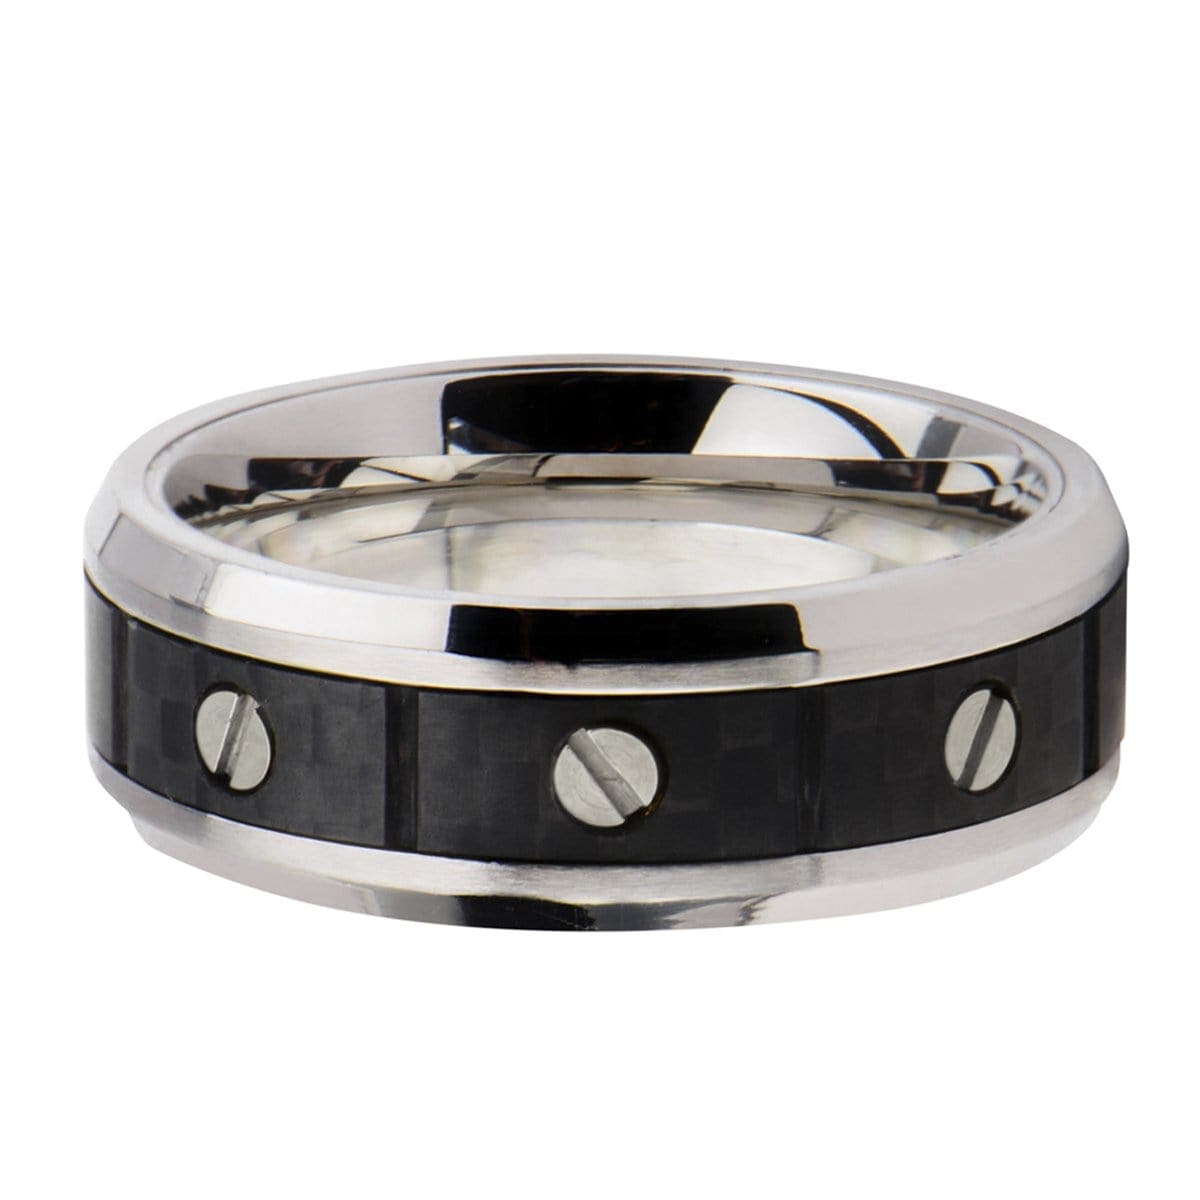 INOX JEWELRY Rings Silver Tone Stainless Steel Screw with Solid Carbon Fiber Band